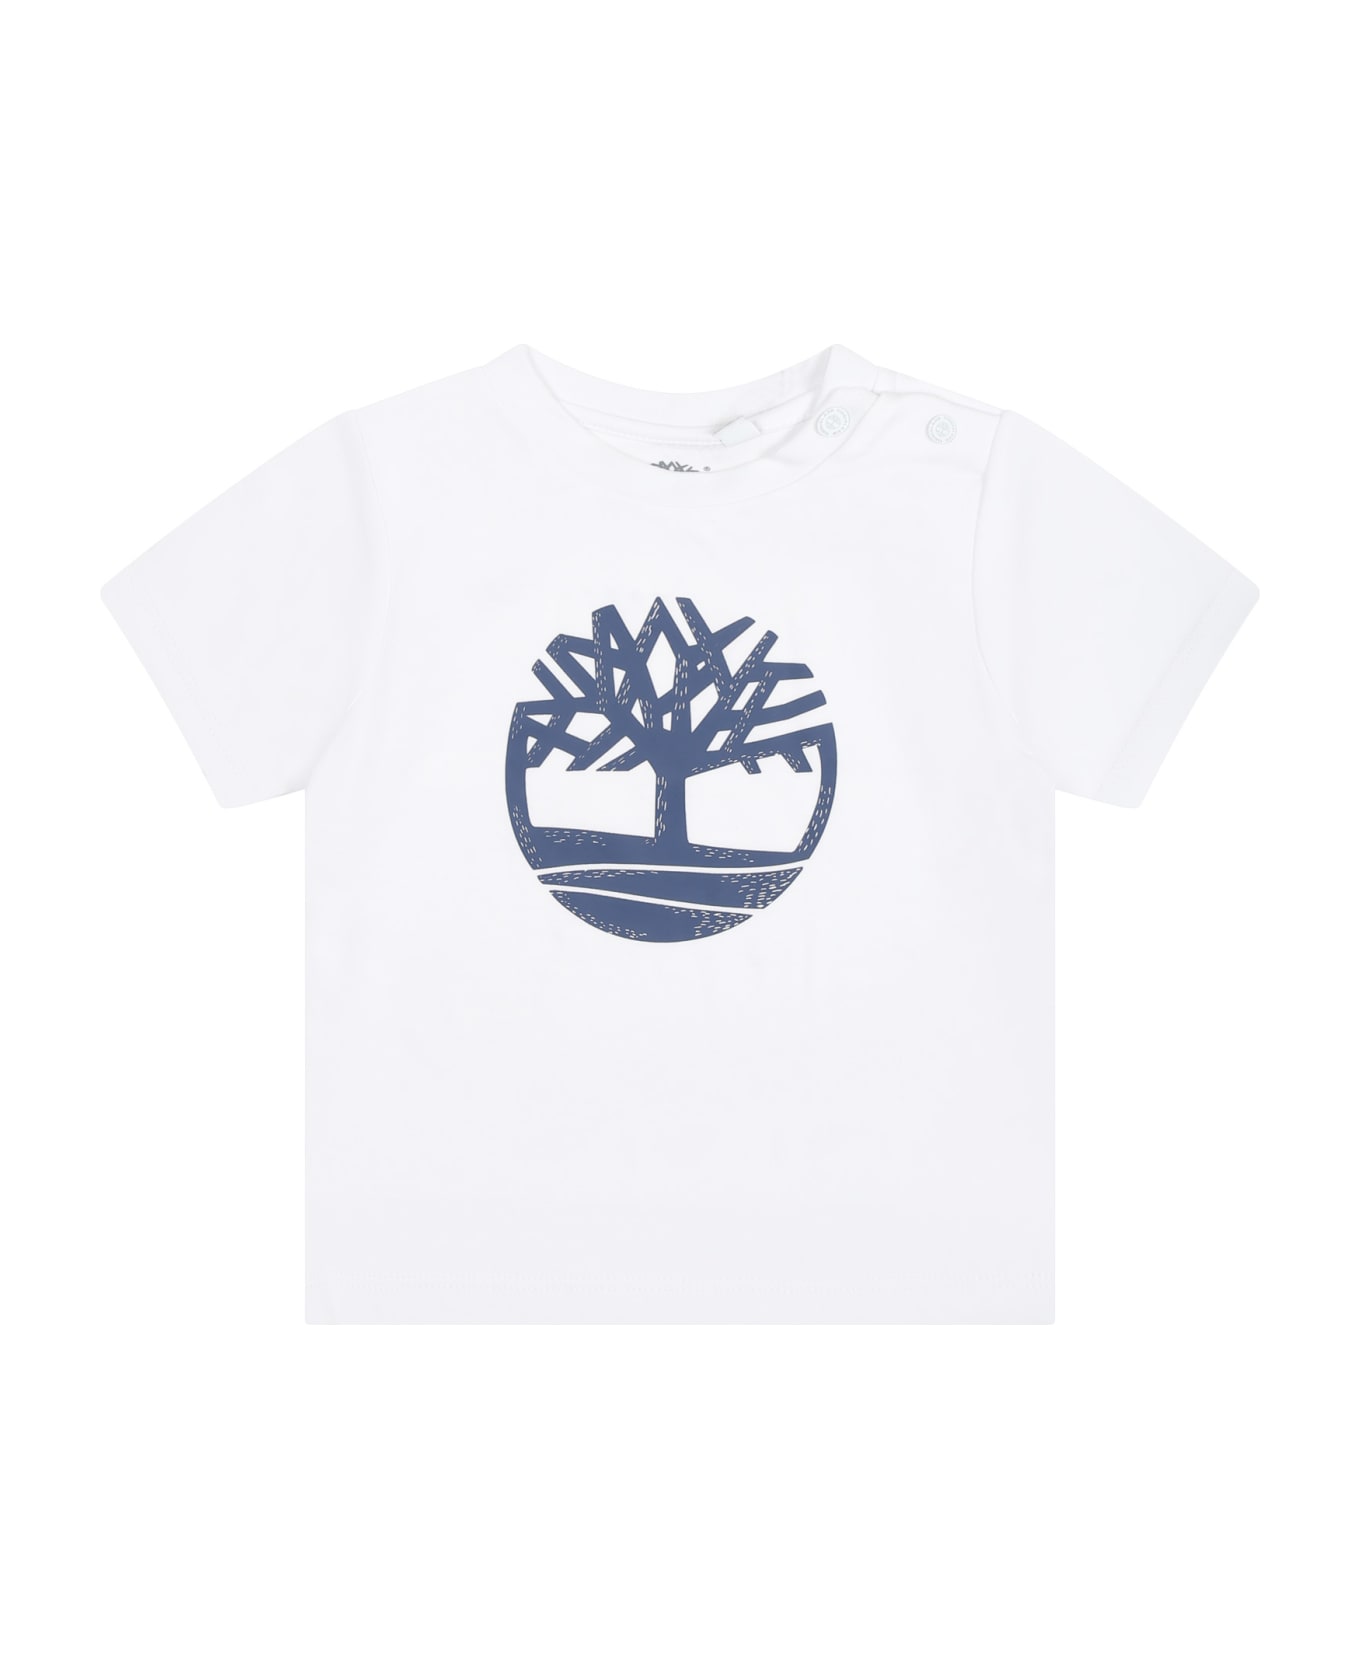 Timberland White T-shirt For Baby Boy With Logo - White